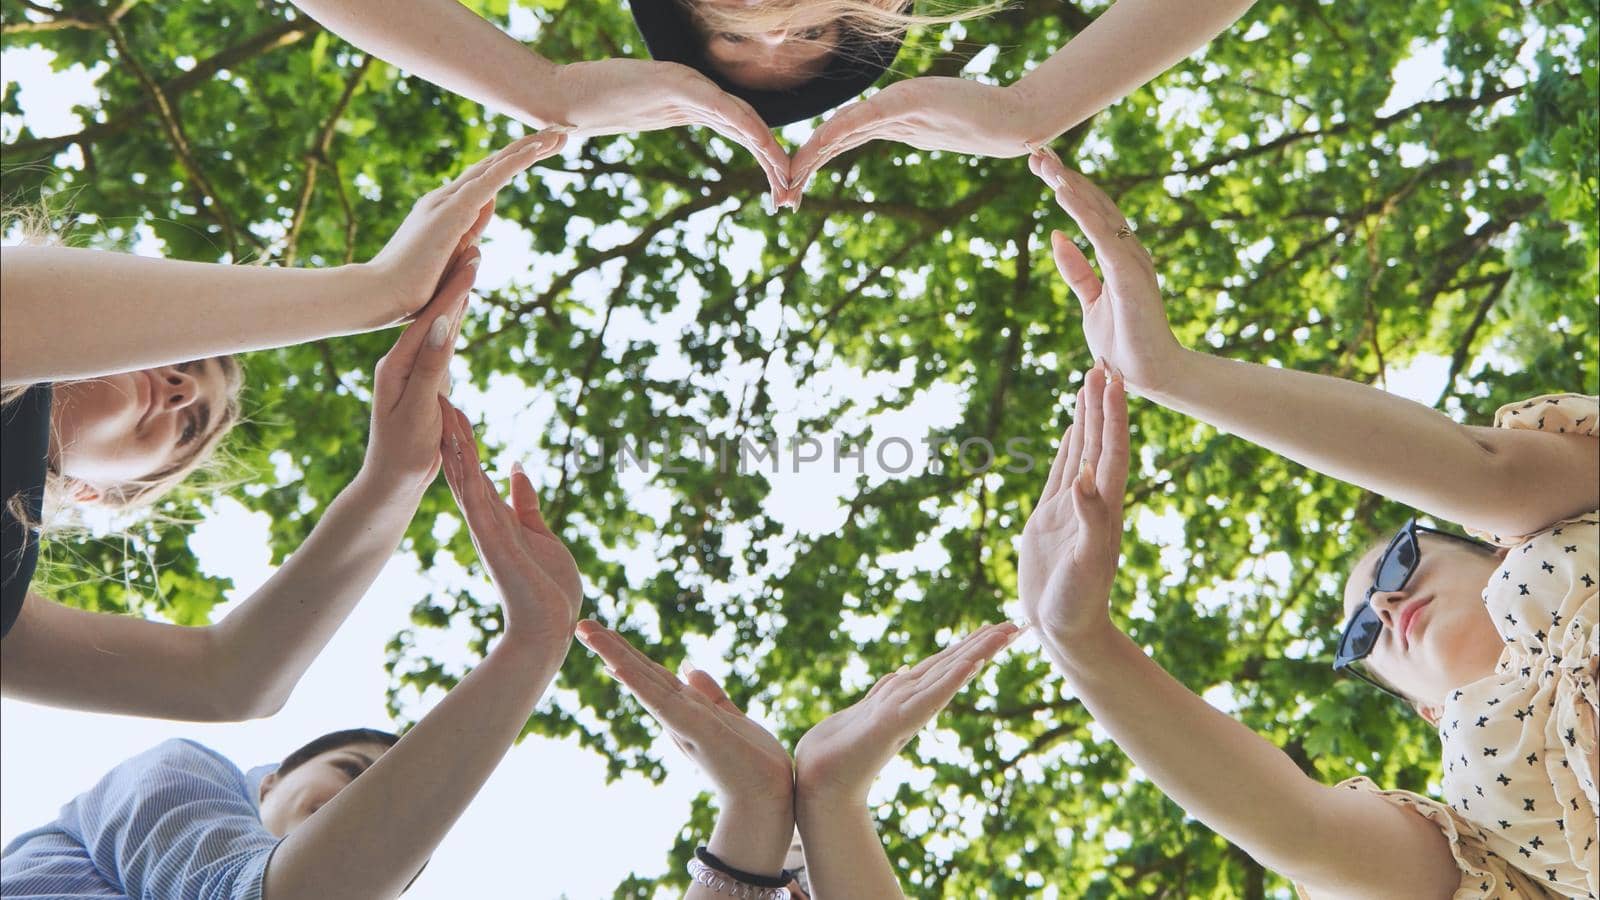 A group of girls makes a heart shape from their hands against the background of tree branches